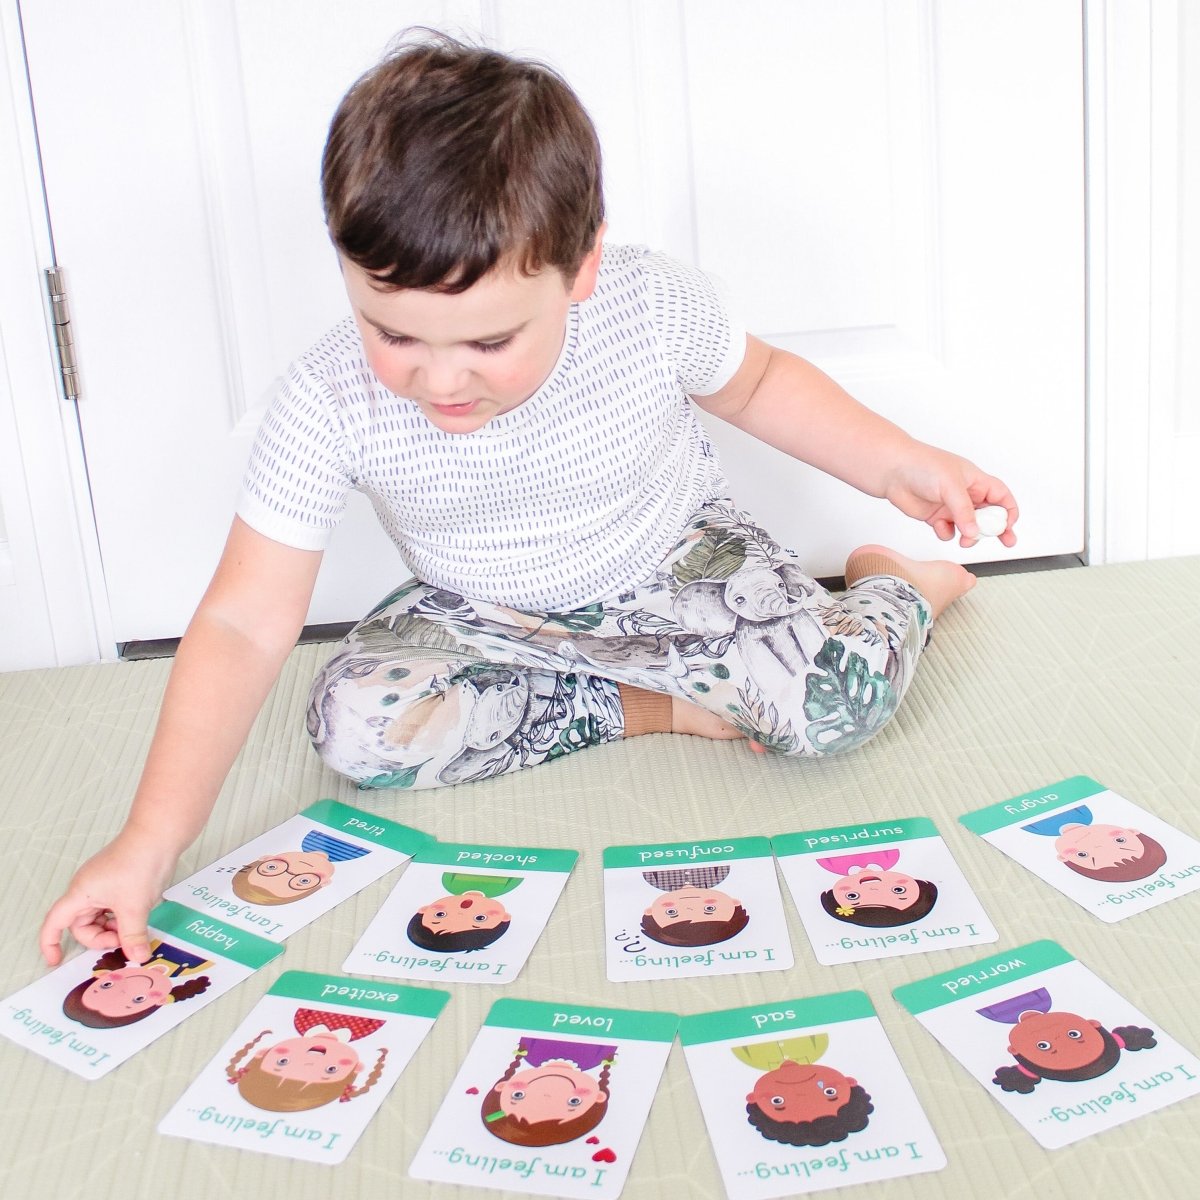 Feelings in a Flash - Emotional Intelligence Flashcard Game - Toddlers &  Special Needs Children - Teaching Empathy Activities, Coping & Social  Skills